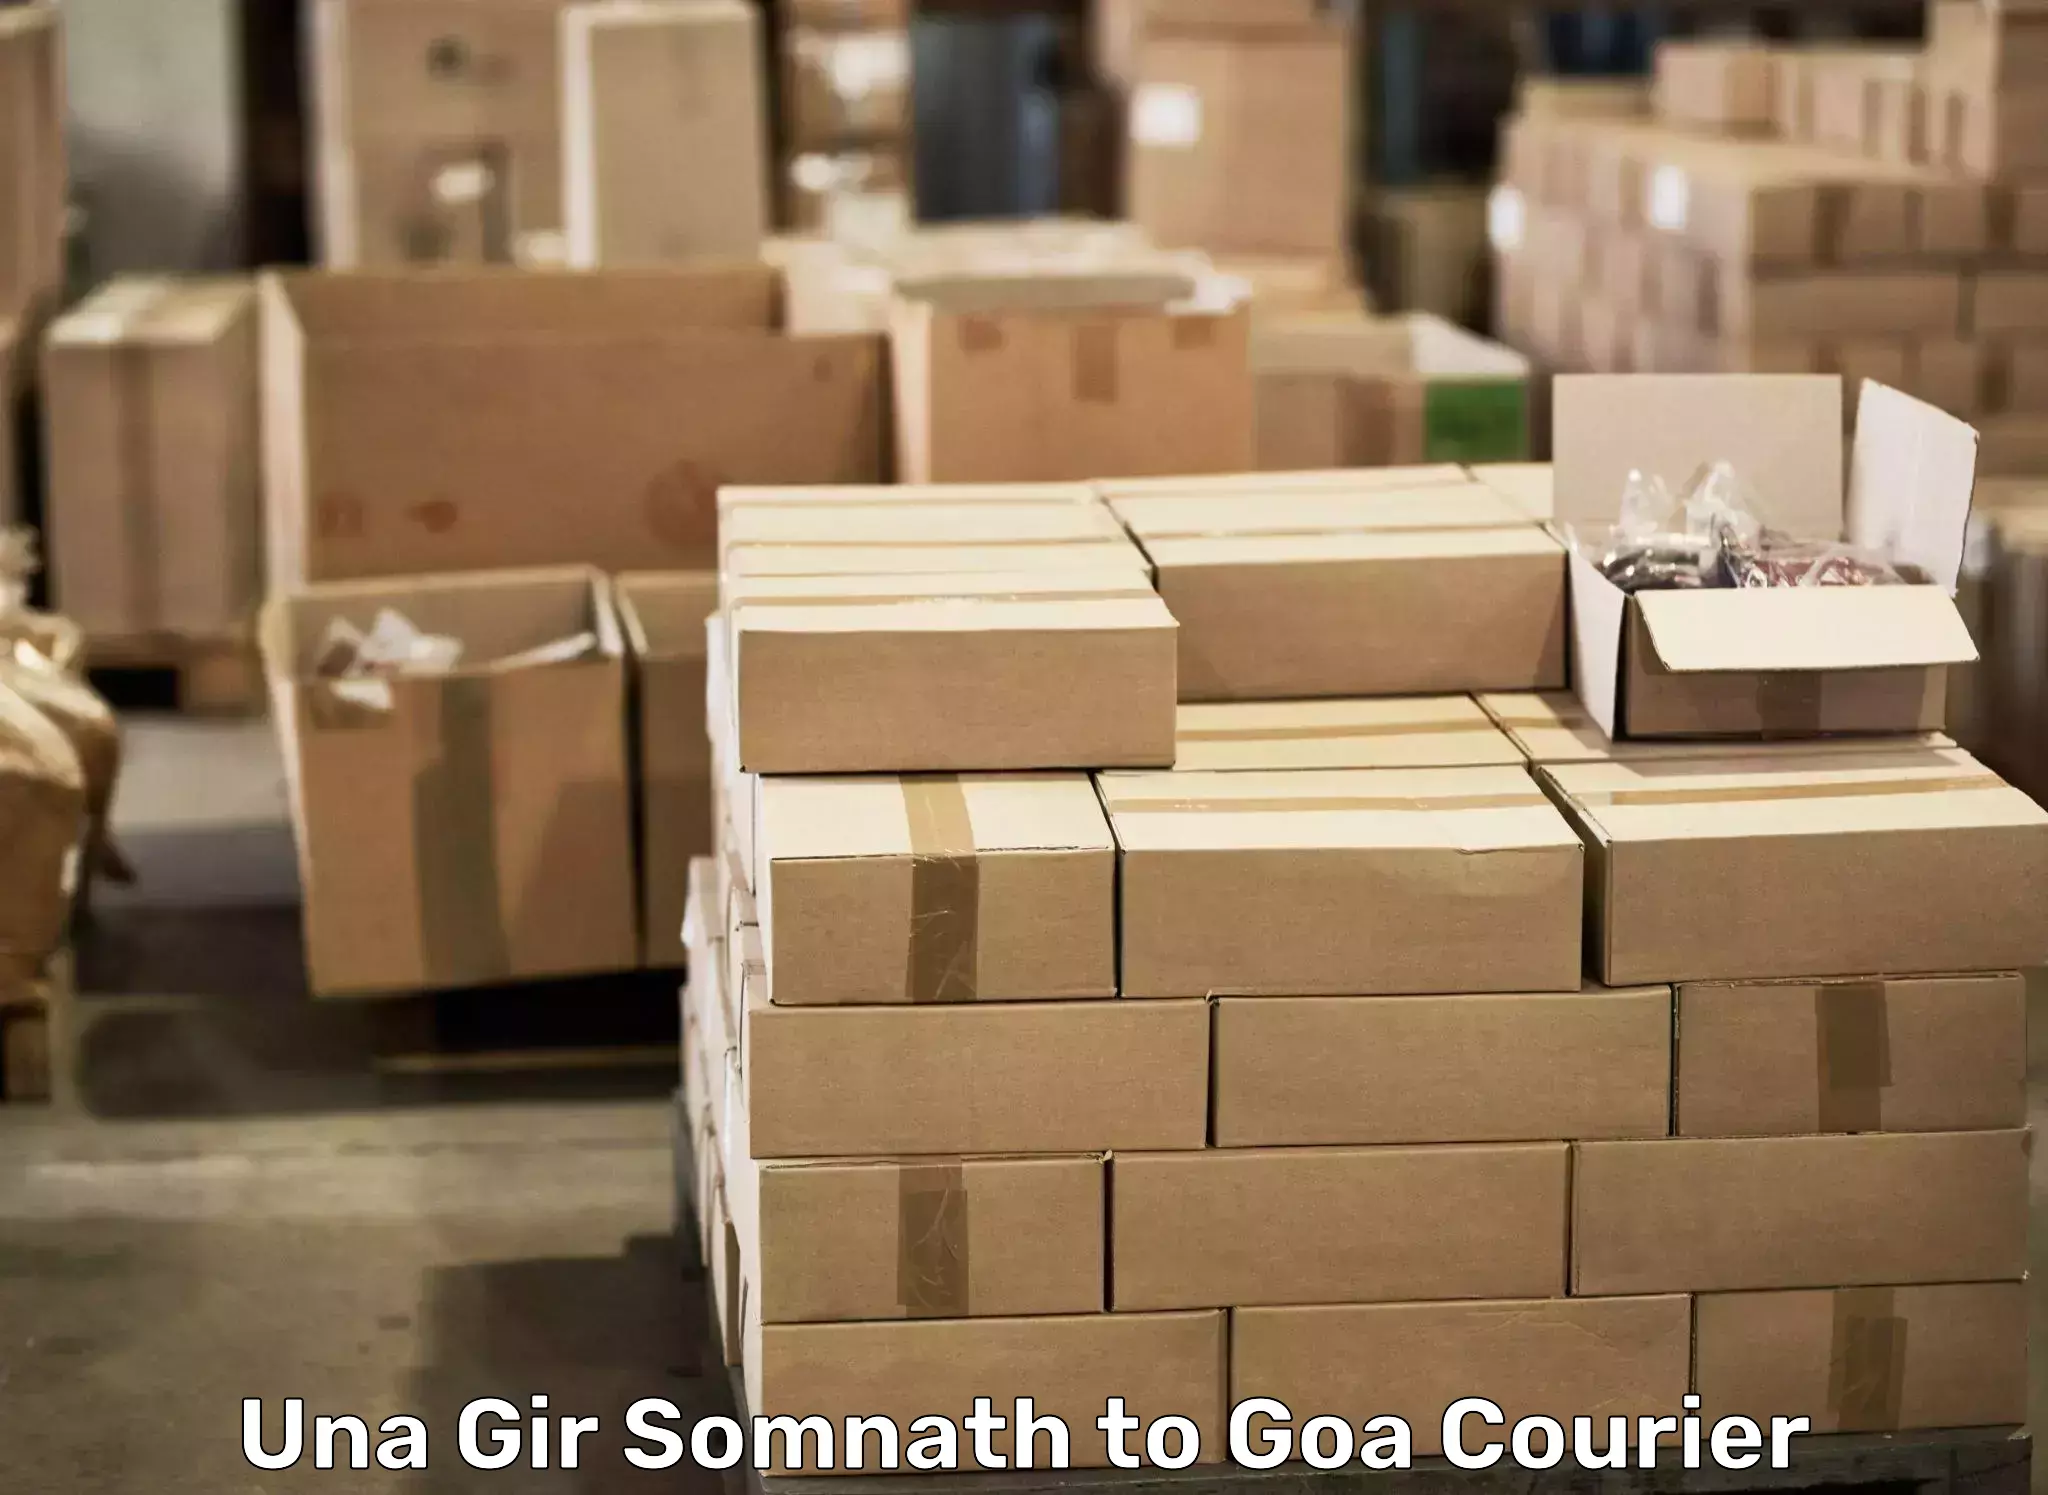 Furniture delivery service Una Gir Somnath to IIT Goa